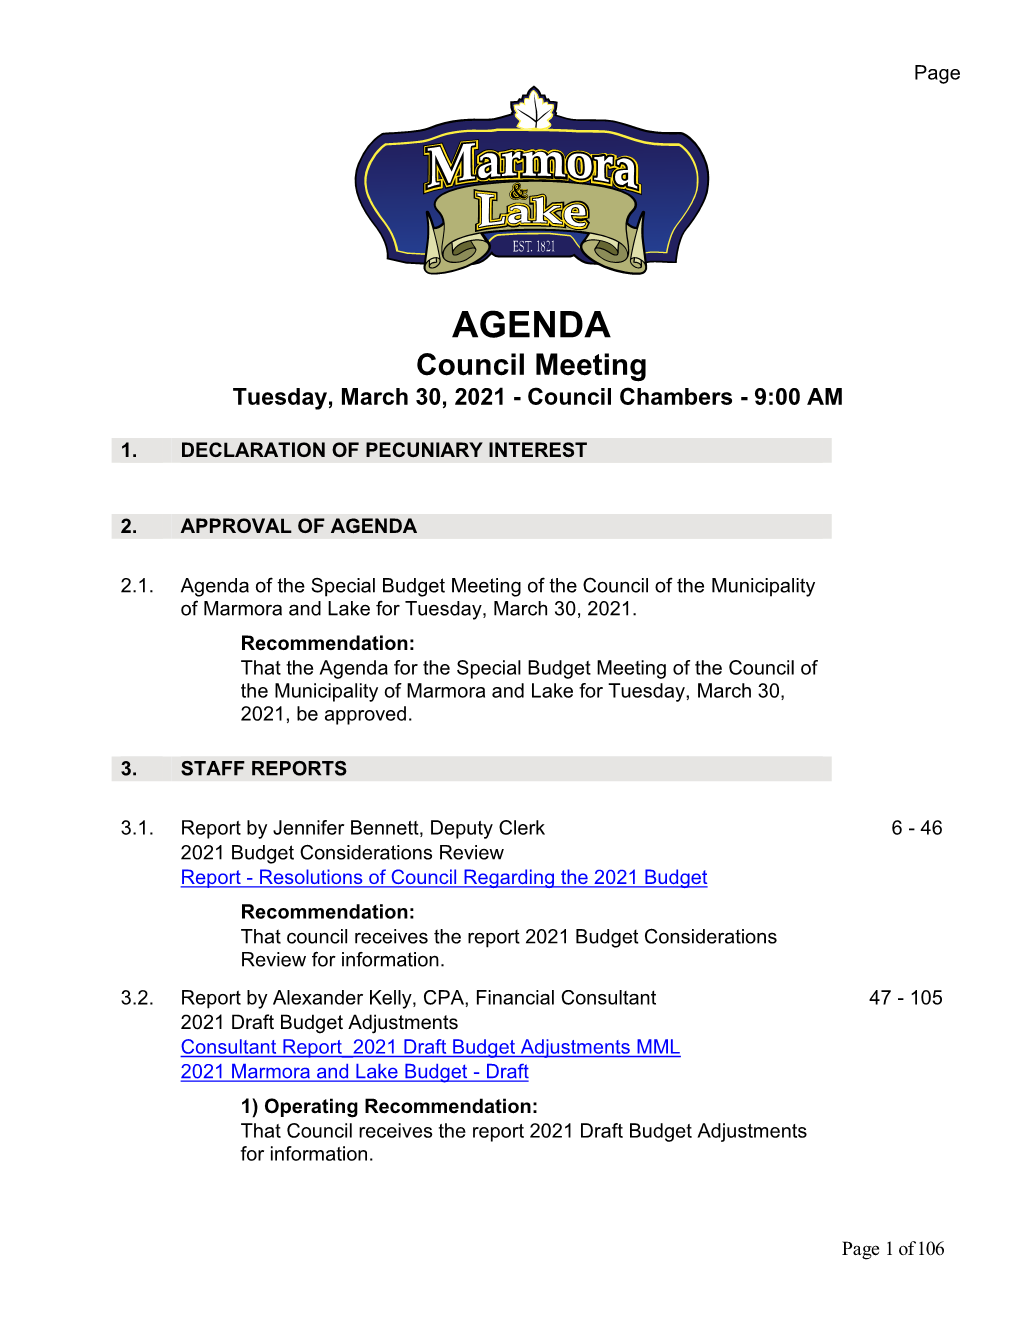 Special Budget Meeting of the Council of the Municipality of Marmora and Lake for Tuesday, March 30, 2021